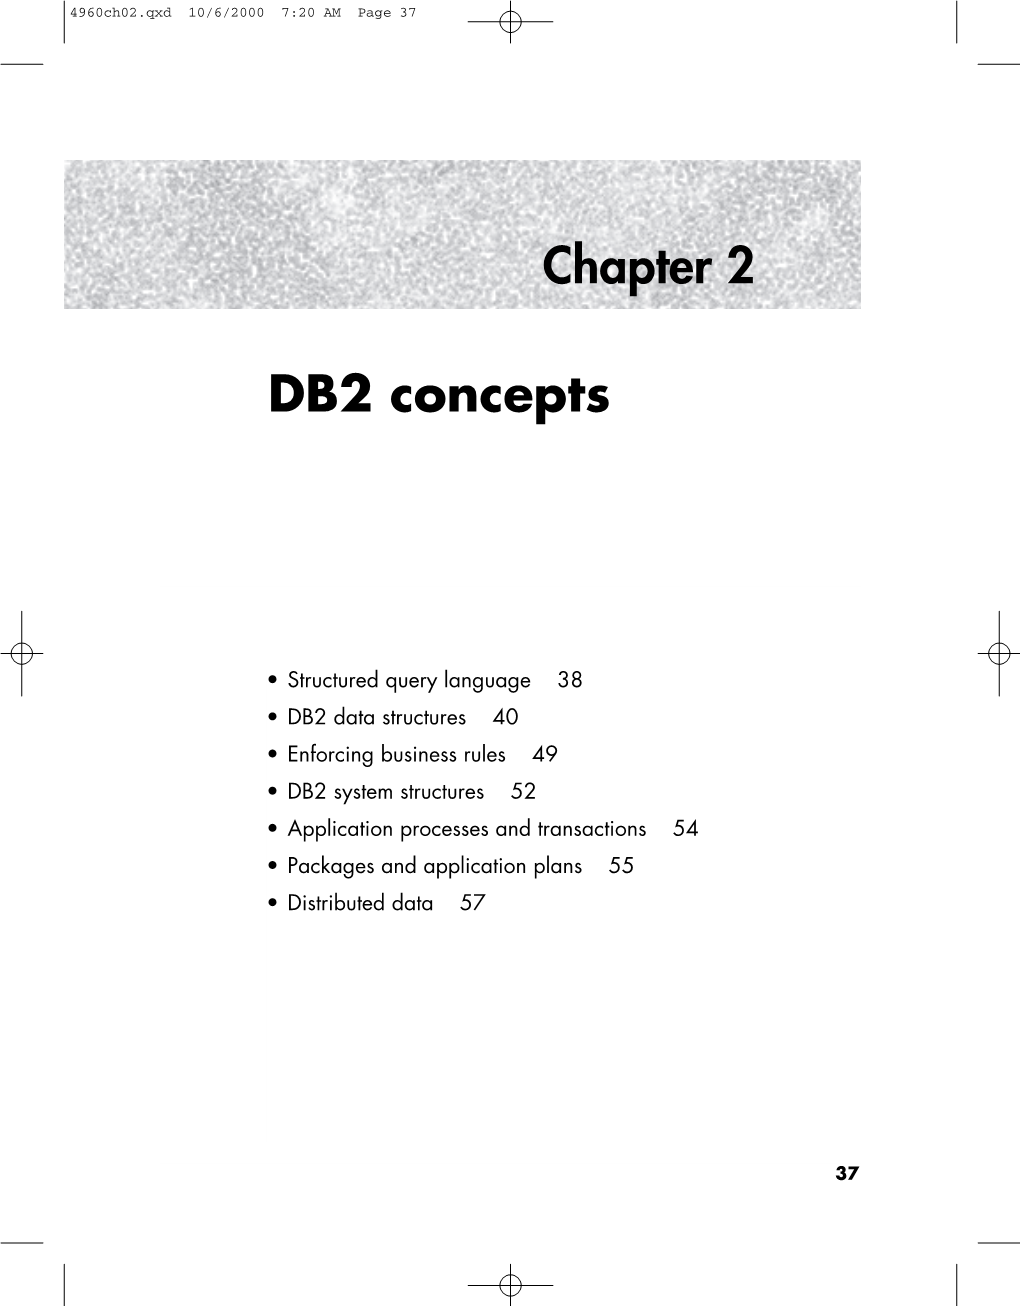 DB2 Concepts Chapter 2